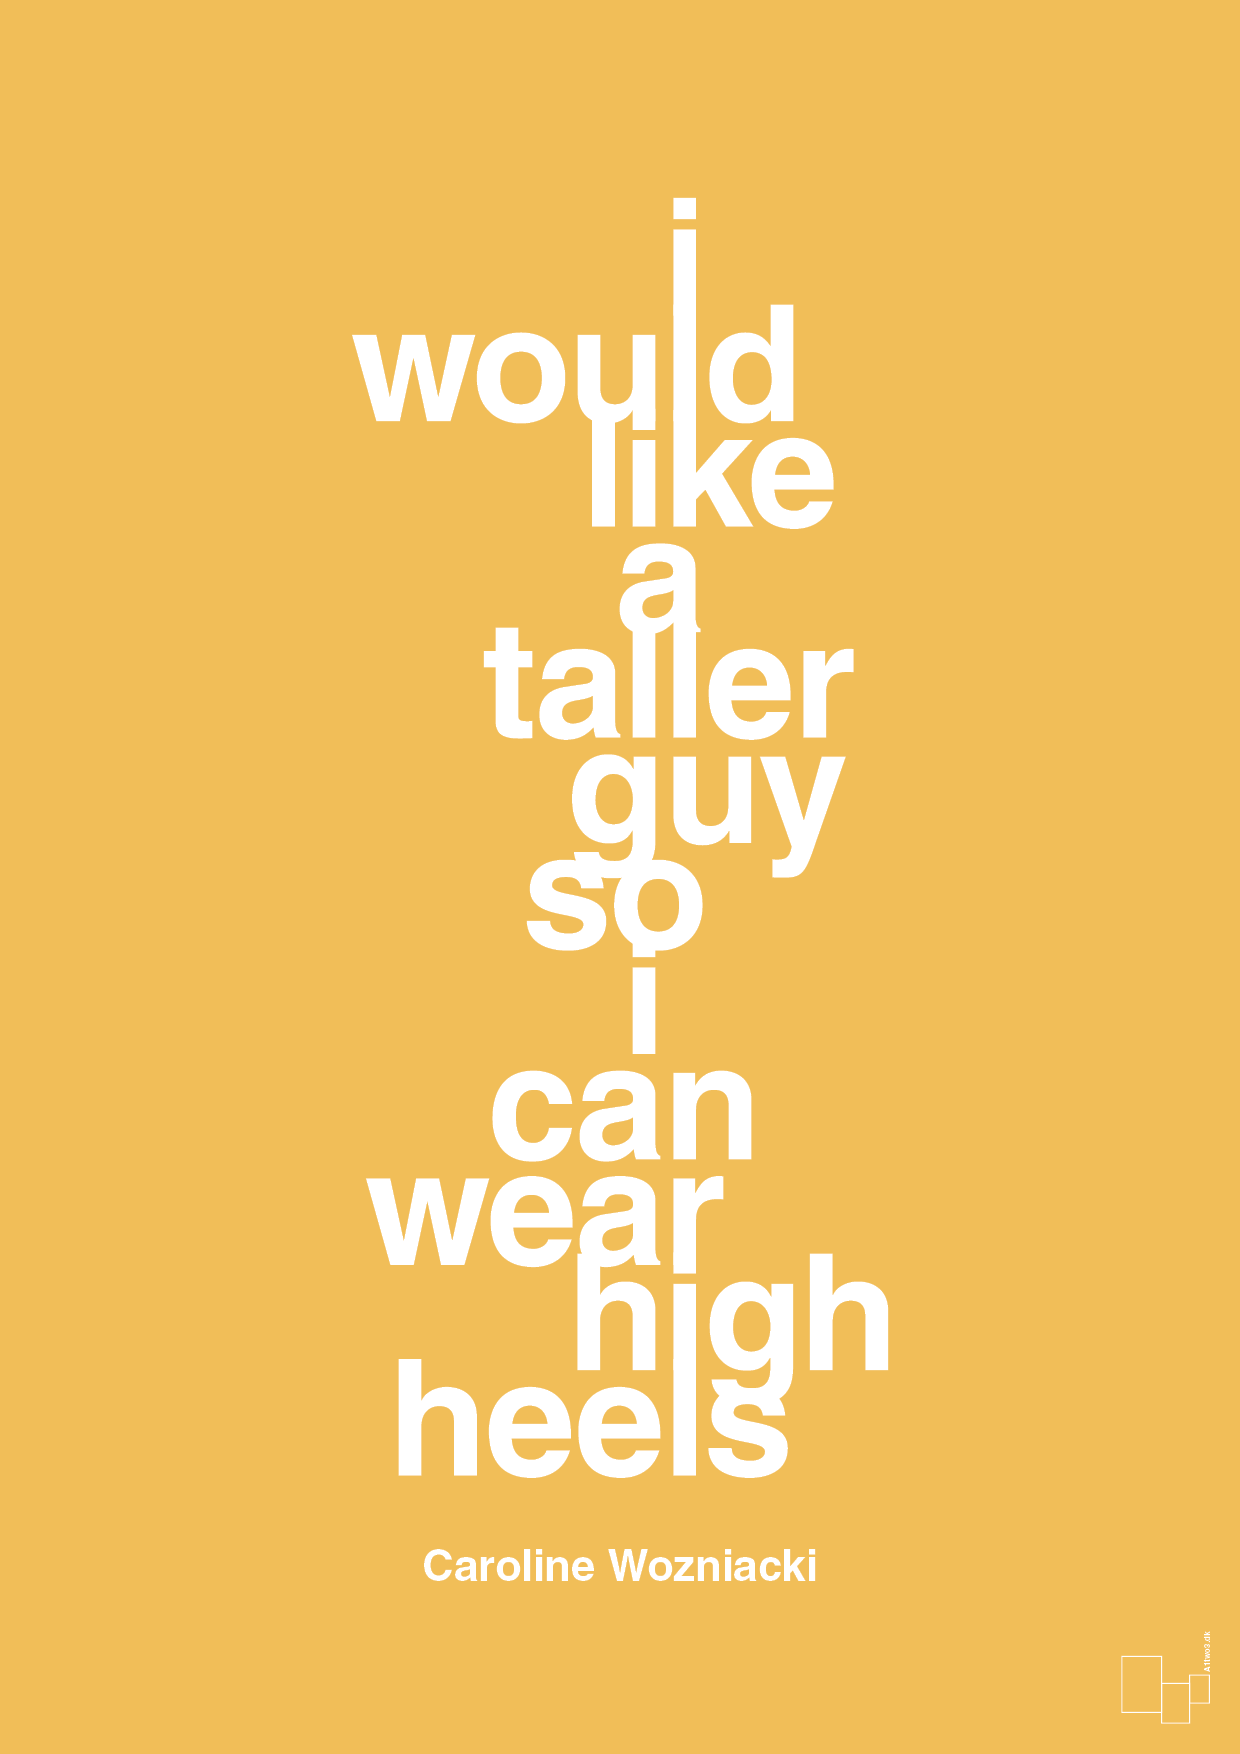 i would like a taller guy so i can wear high heels - Plakat med Citater i Honeycomb